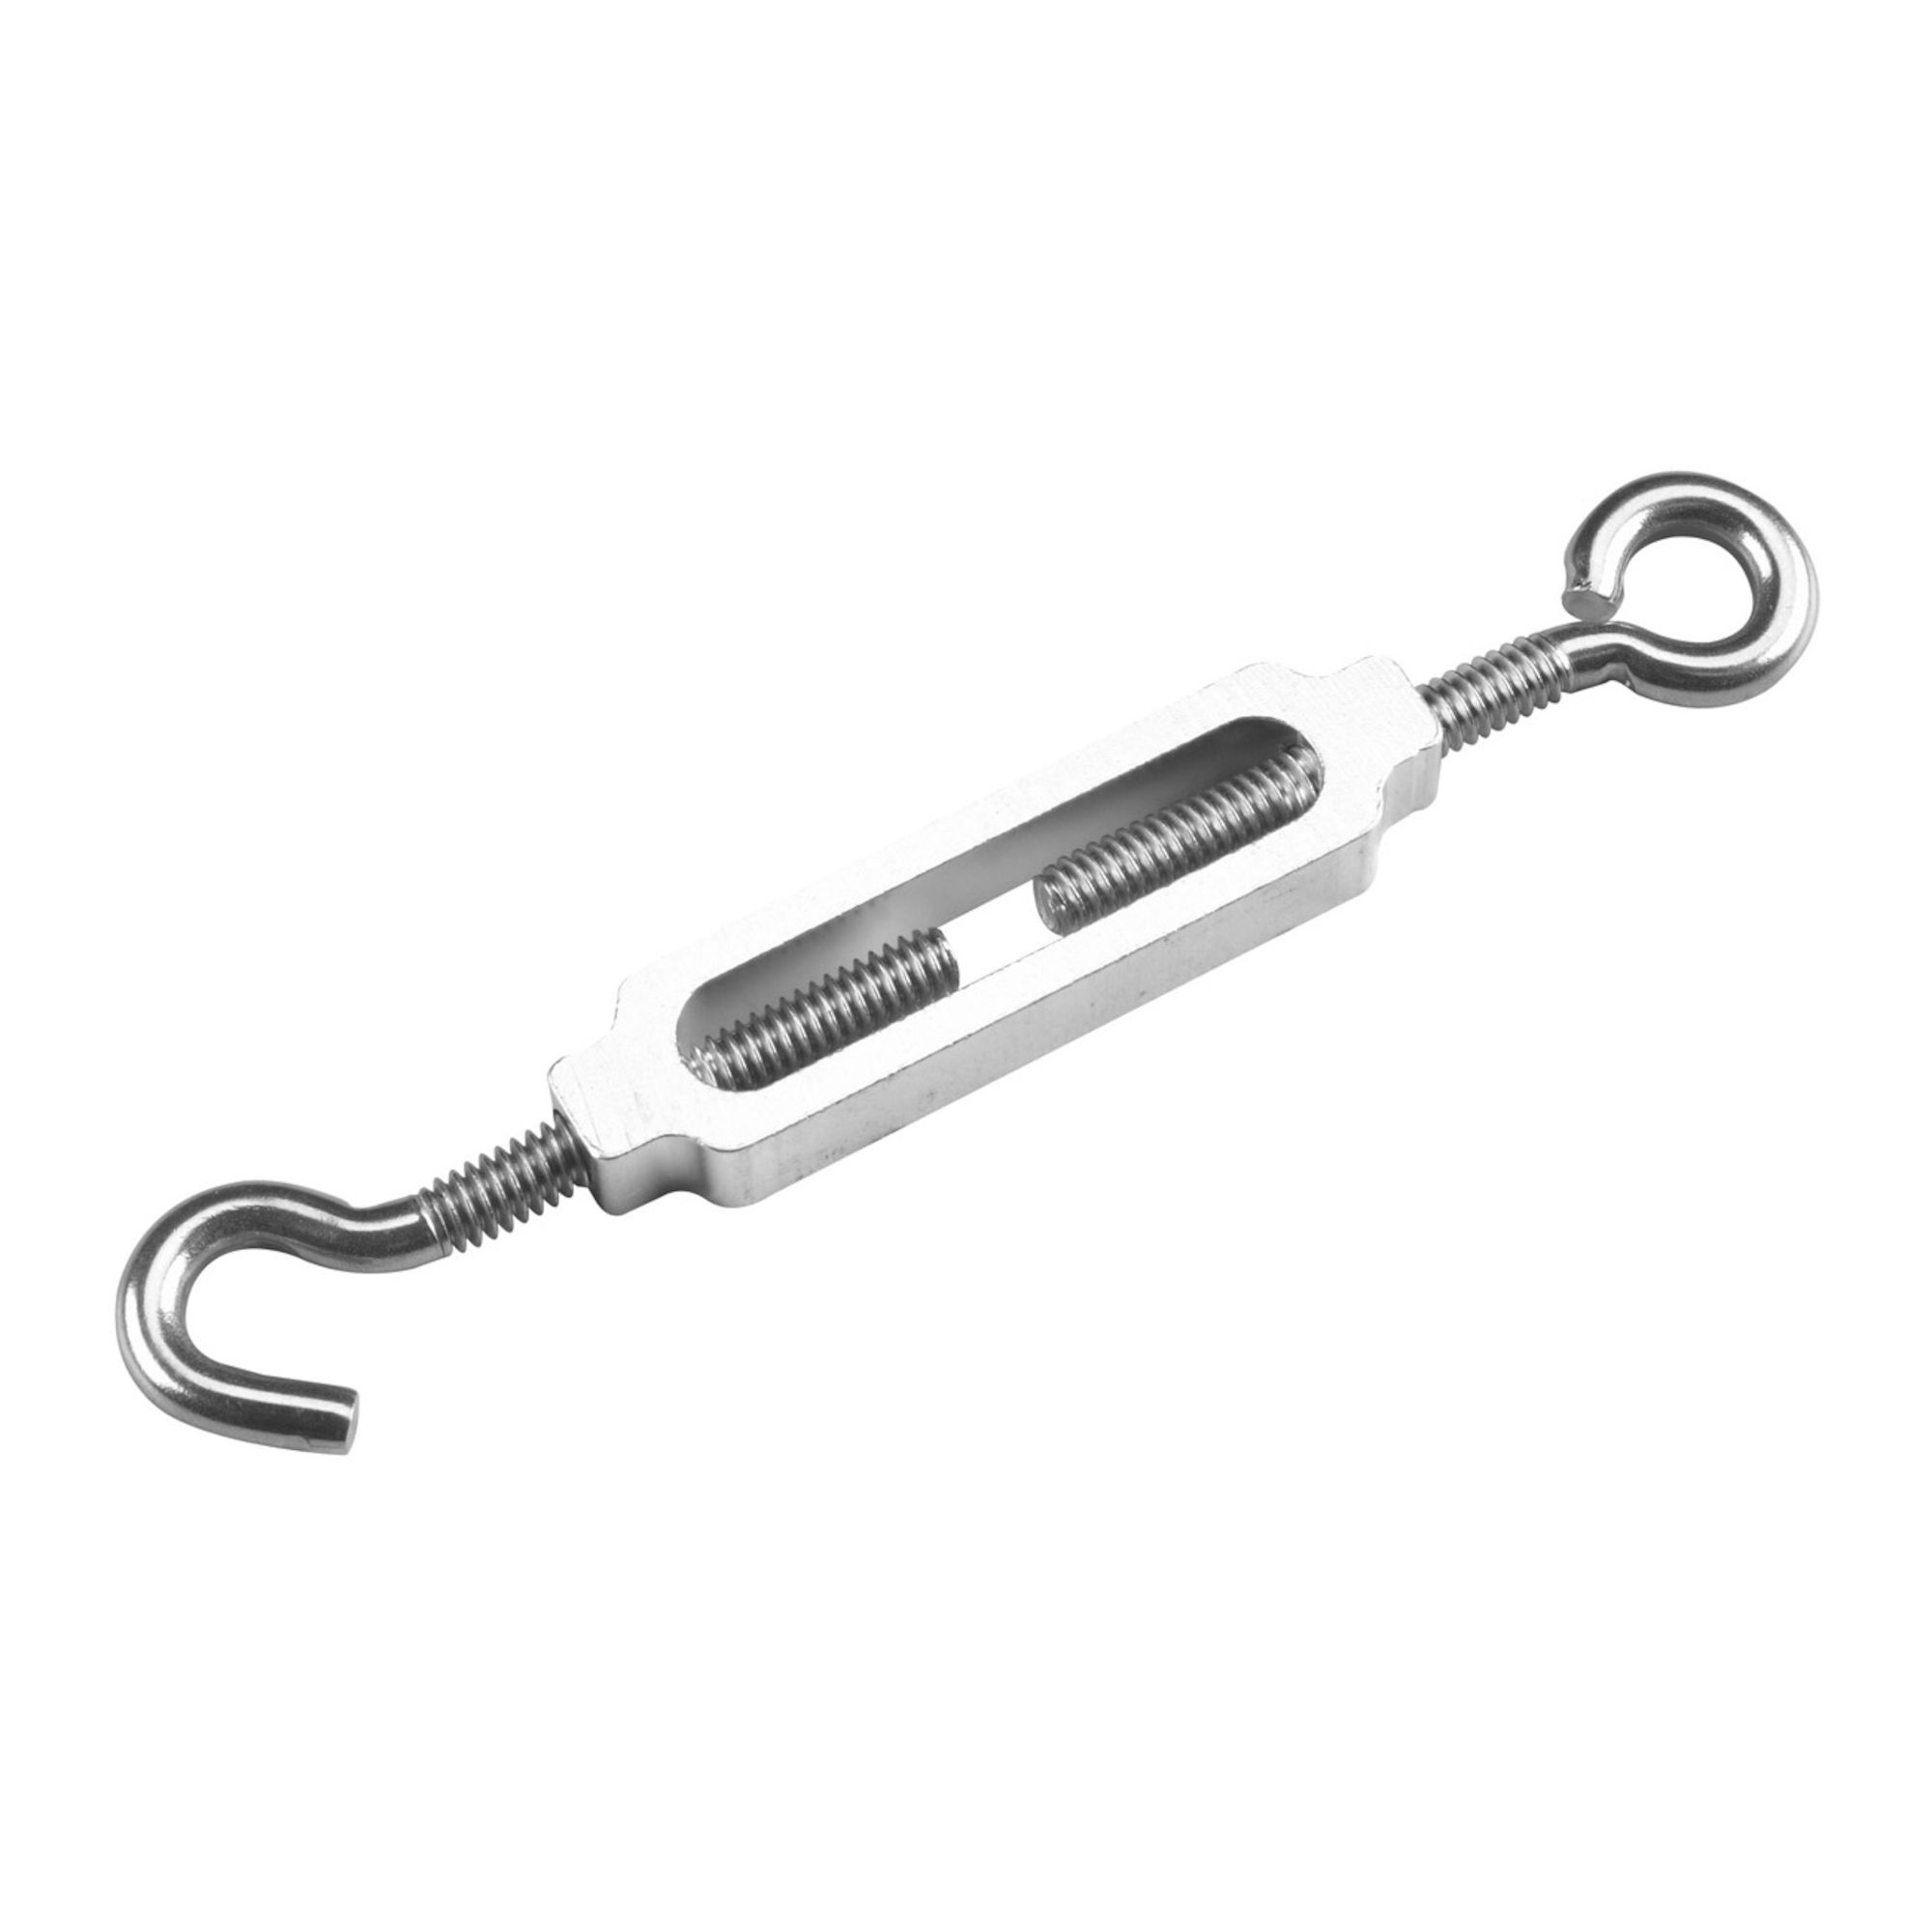 Hook by eye turnbuckle - Stainless Steel - 1/4 x 7 5/8 from RICHELIEU